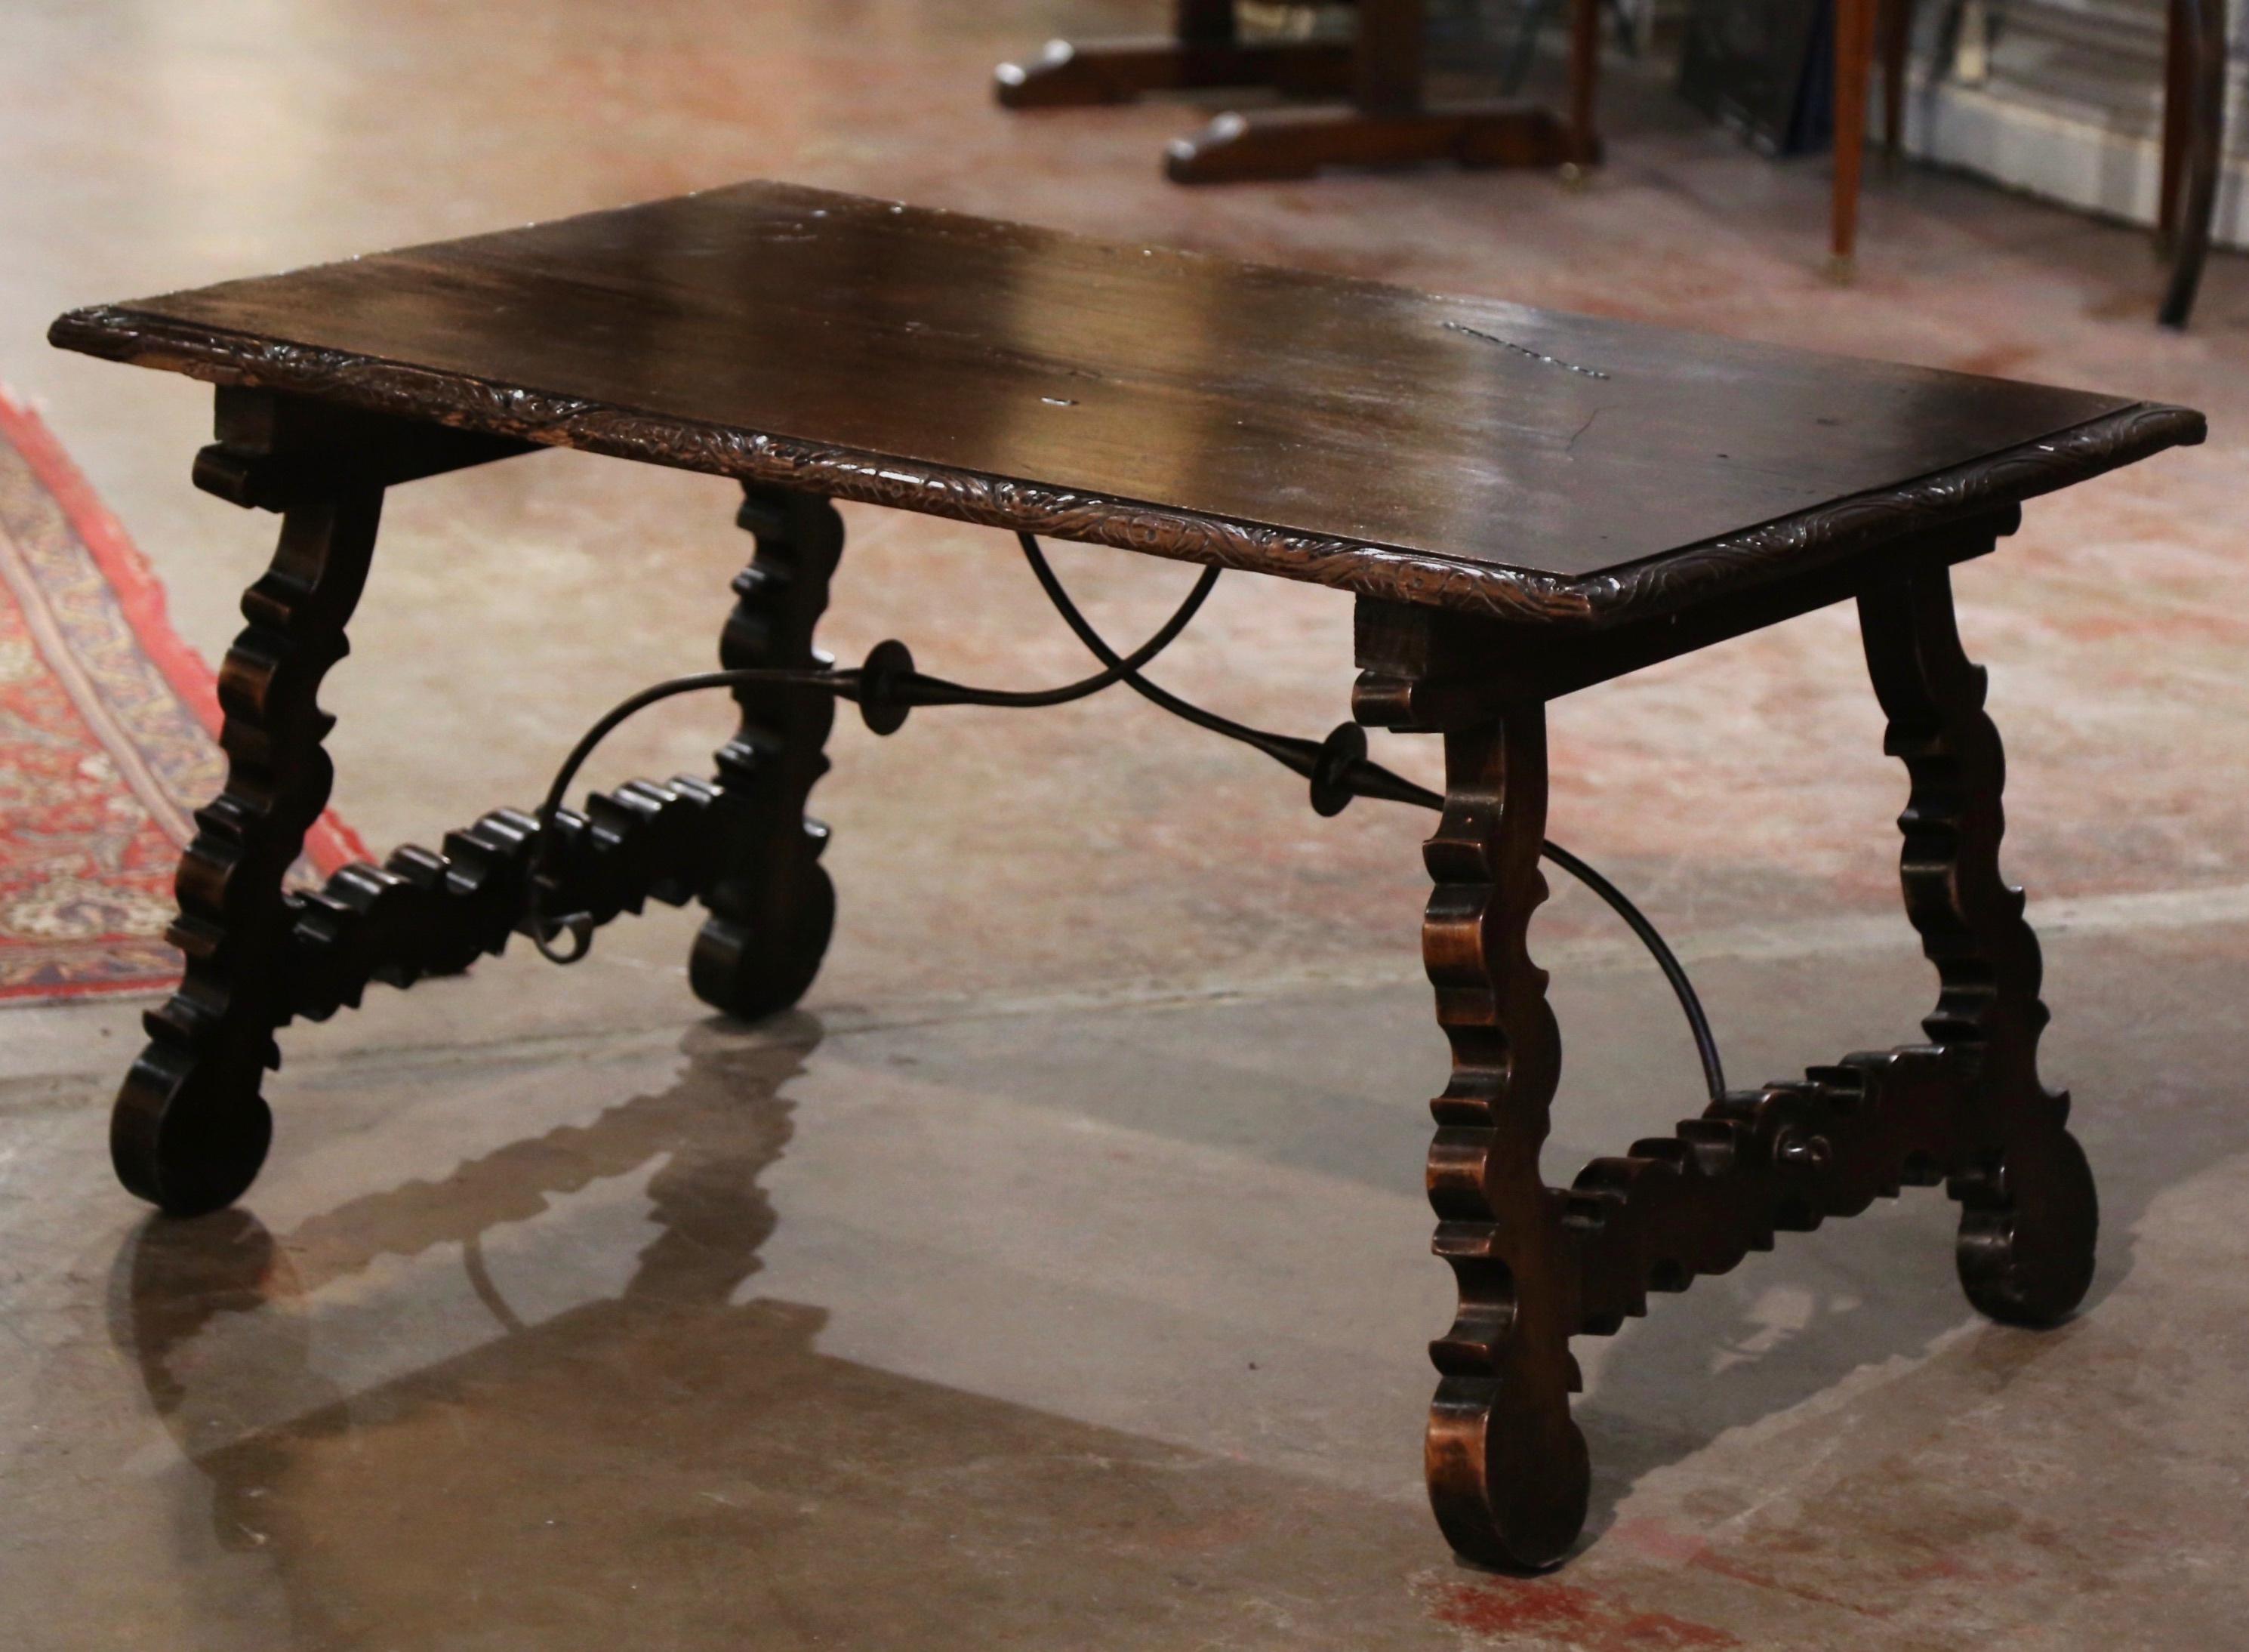 Crafted in Spain circa 1780, and built of solid walnut, the rectangular antique trestle coffee table stands on two carved scrolled legs joined together with a forged iron stretcher; the top is built with two planks of walnut wood and embellished